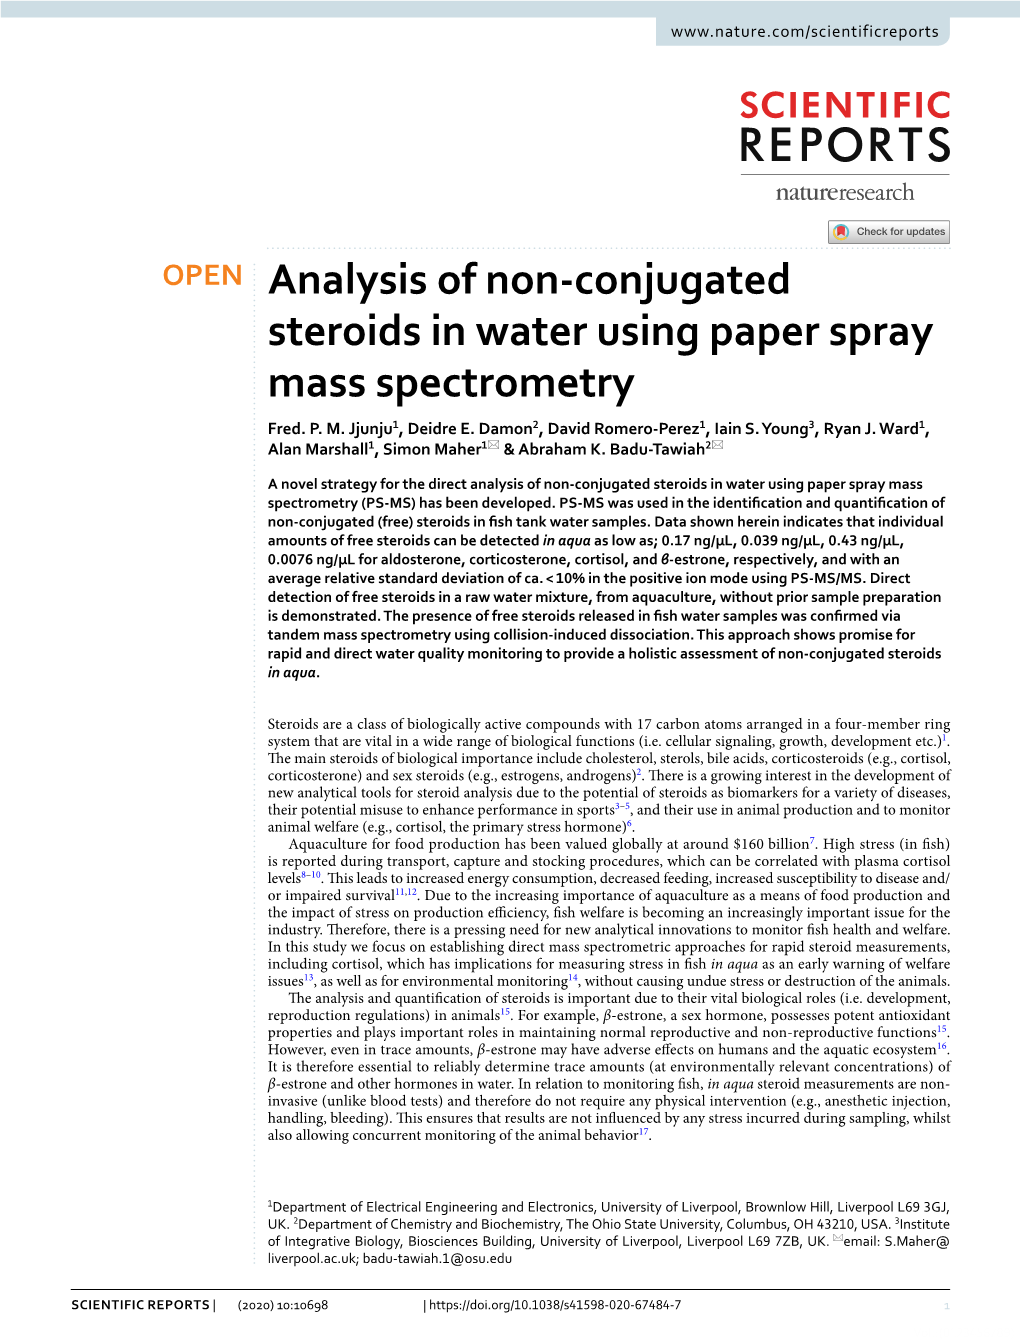 Analysis of Non-Conjugated Steroids in Water Using Paper Spray Mass Spectrometry (PS-MS) Has Been Developed